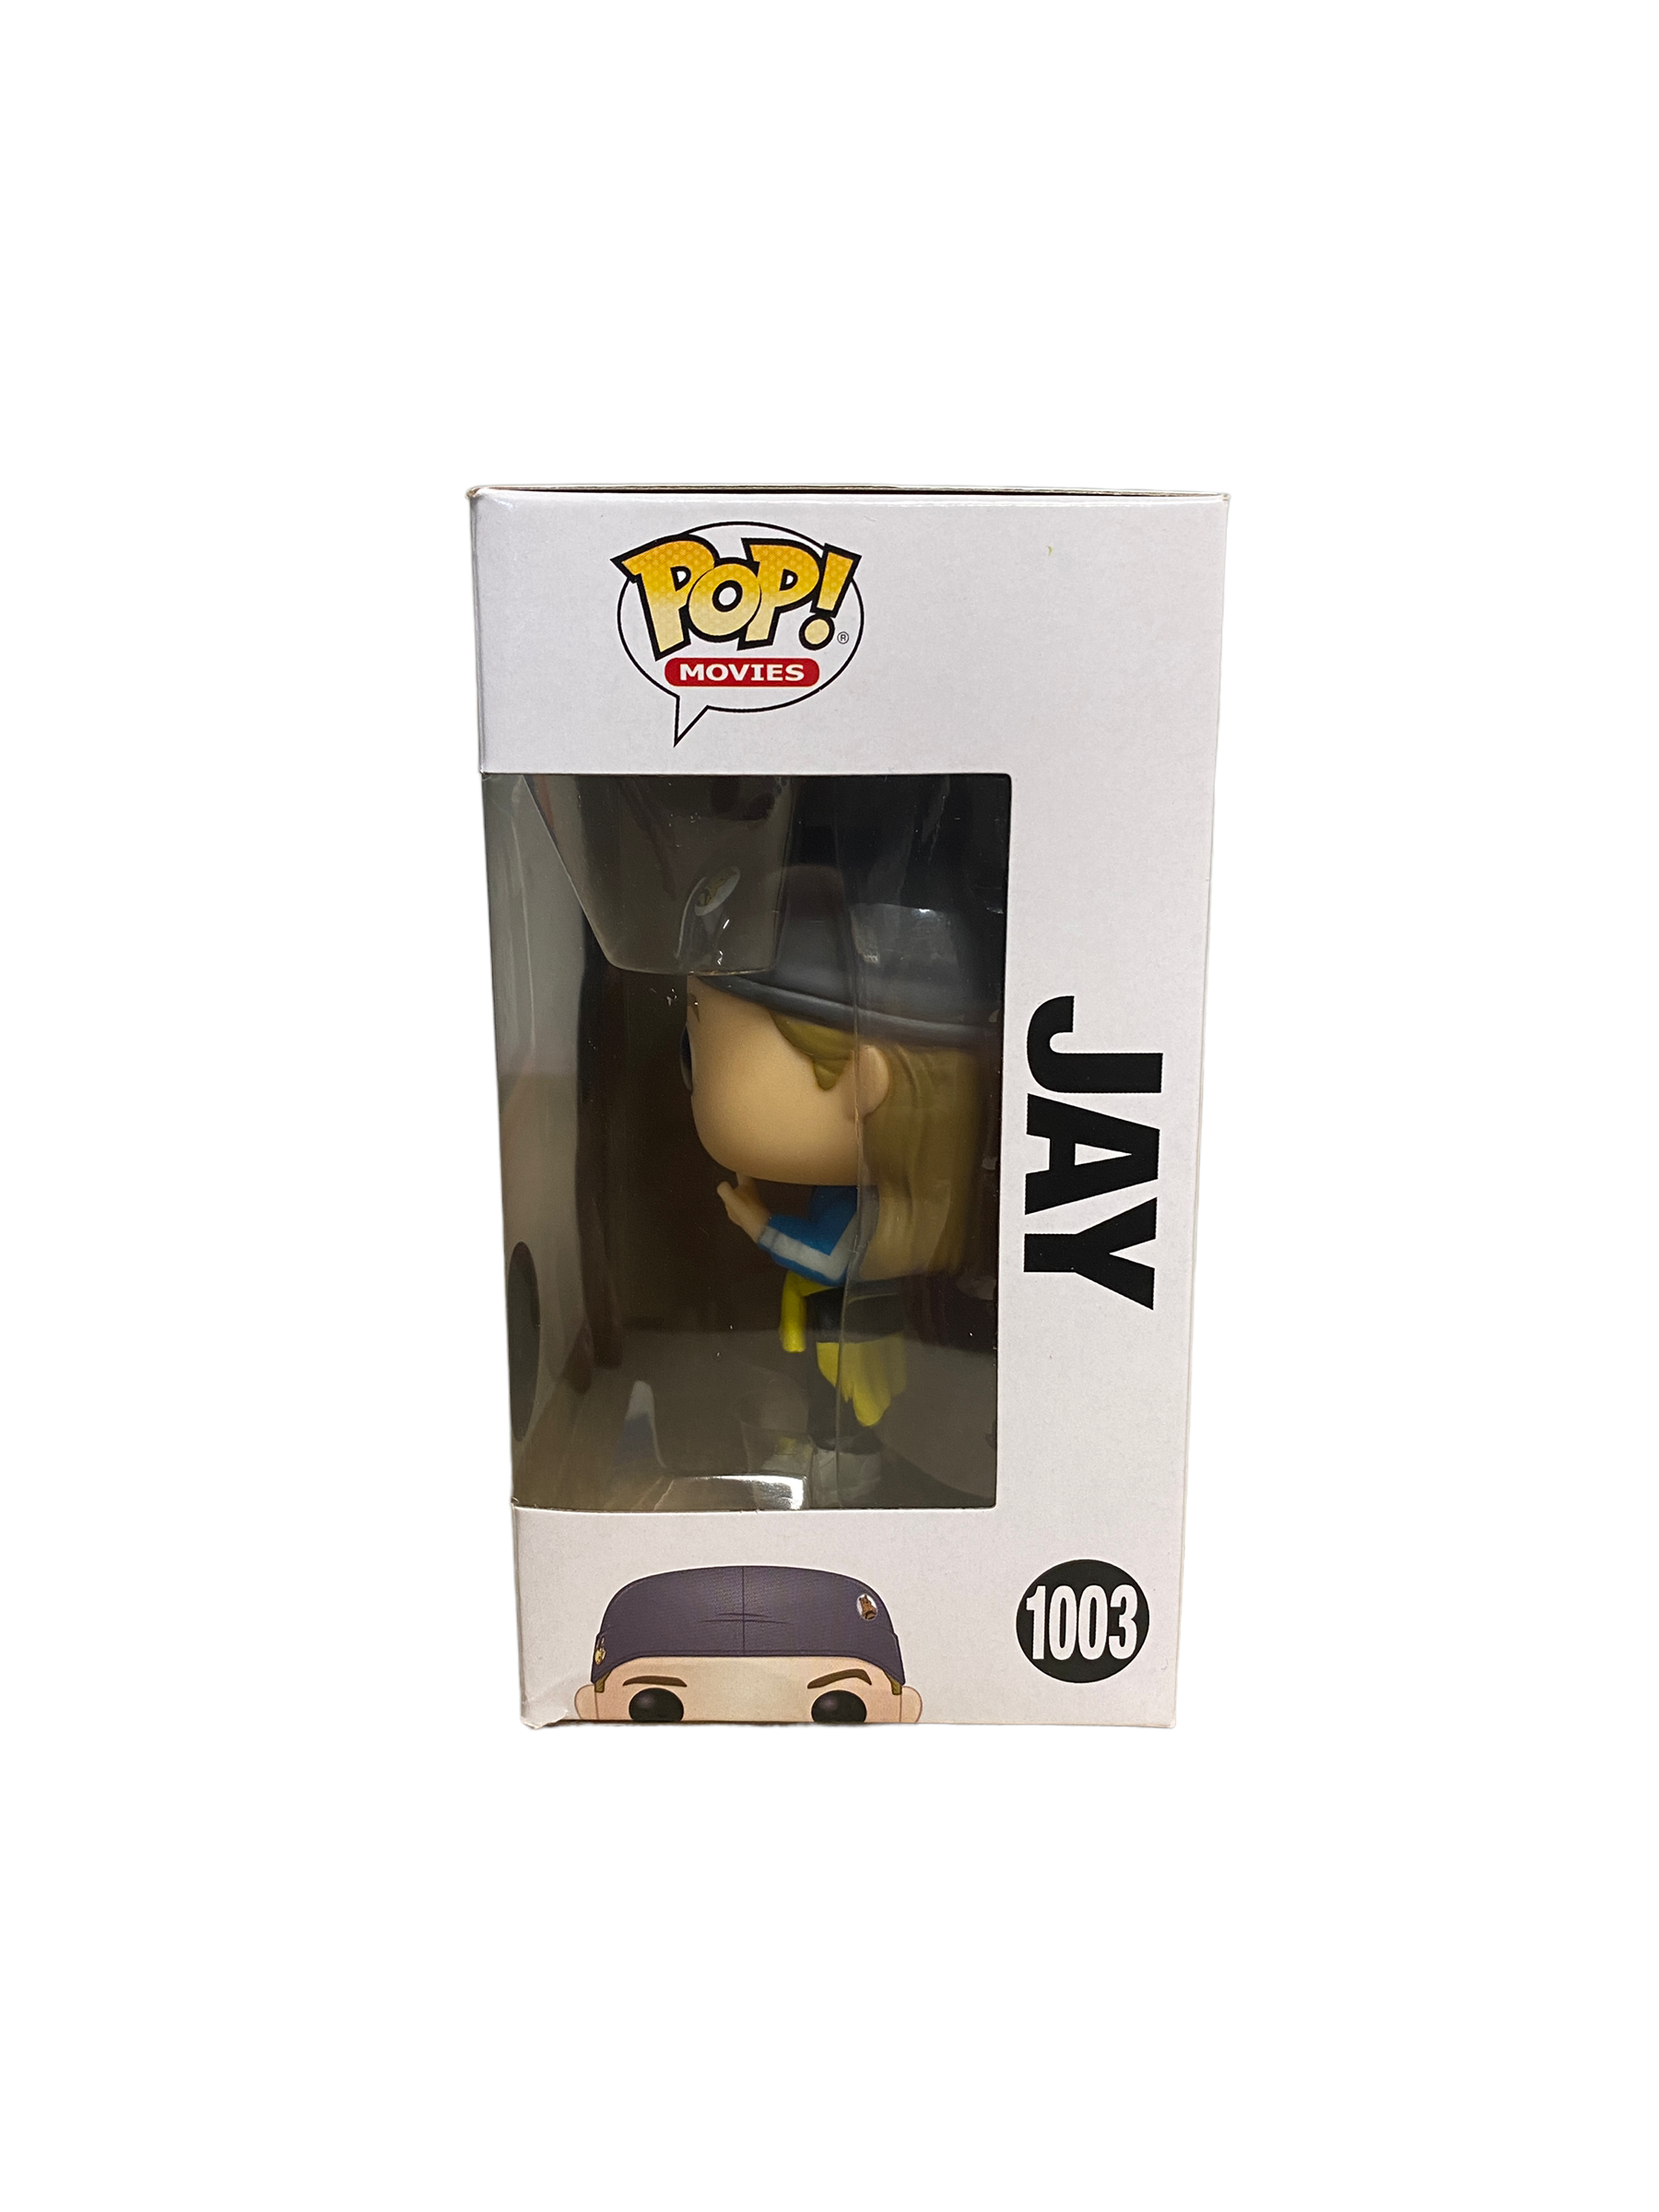 Jay #1003 Funko Pop! - Jay and Silent Bob Reboot - Popcultcha Exclusive - Condition 8/10